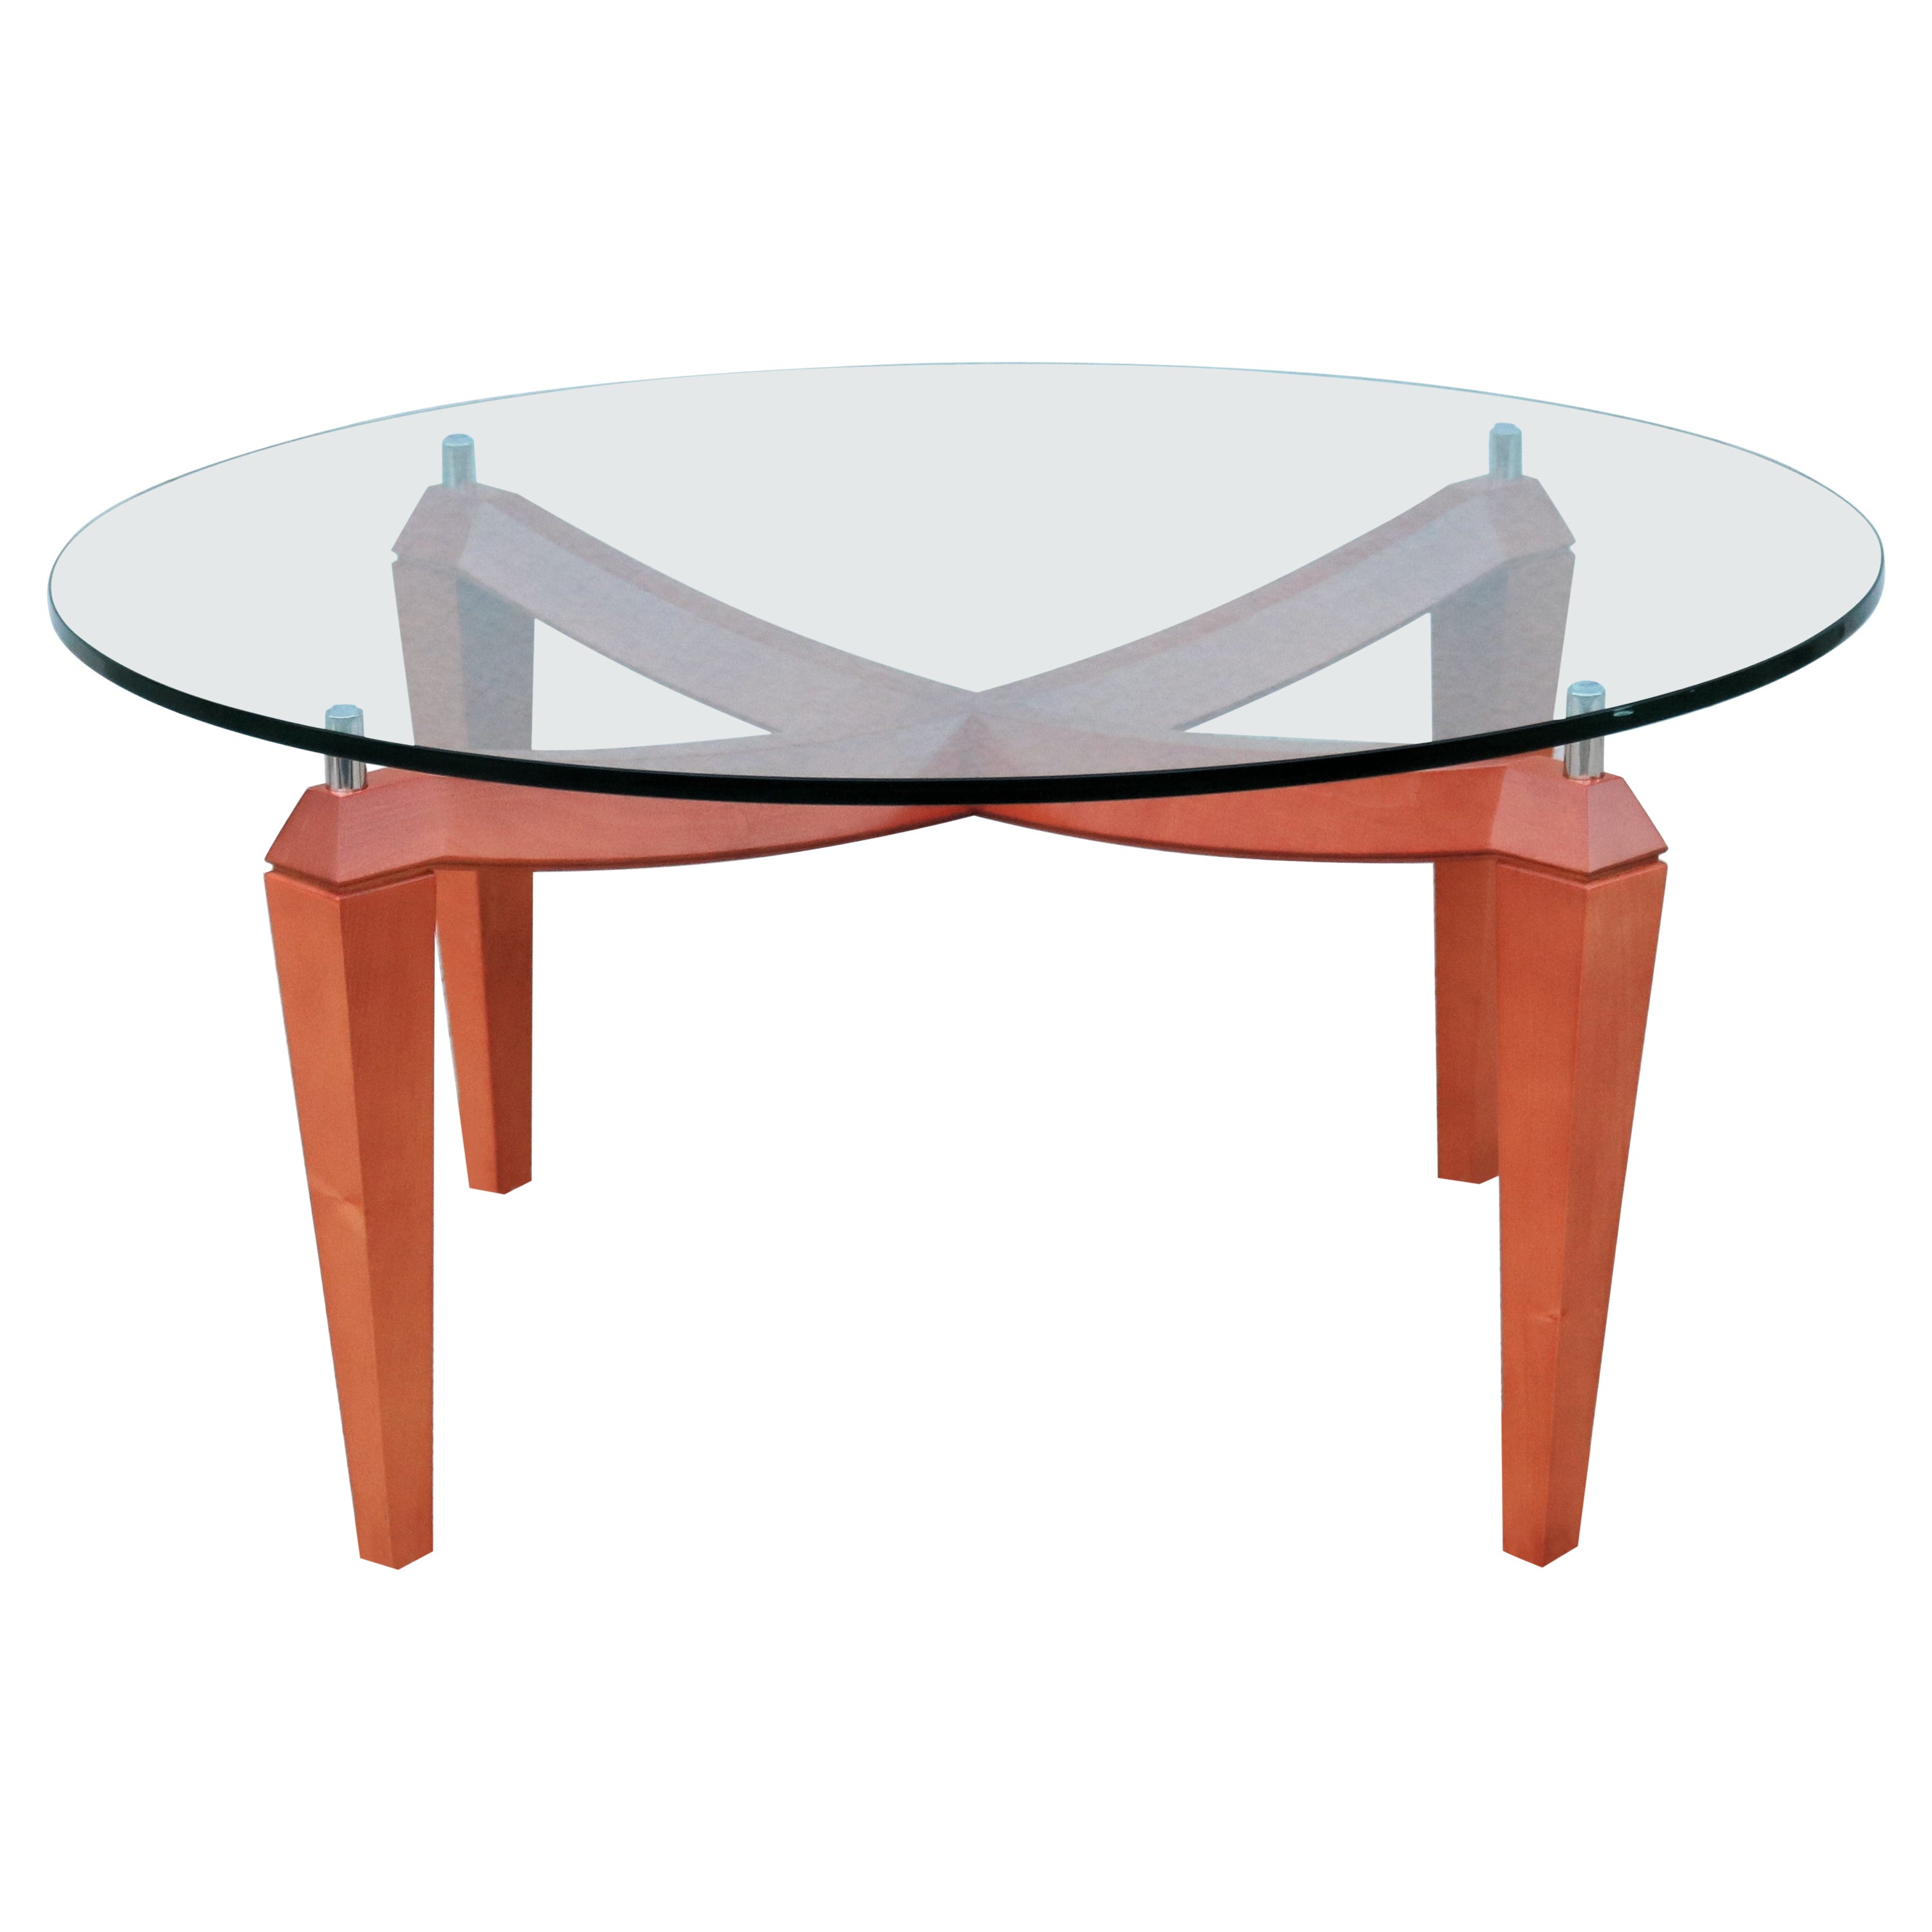 Modern Italian Cherry Wood and Transparent Glass Round Coffee Table For Sale